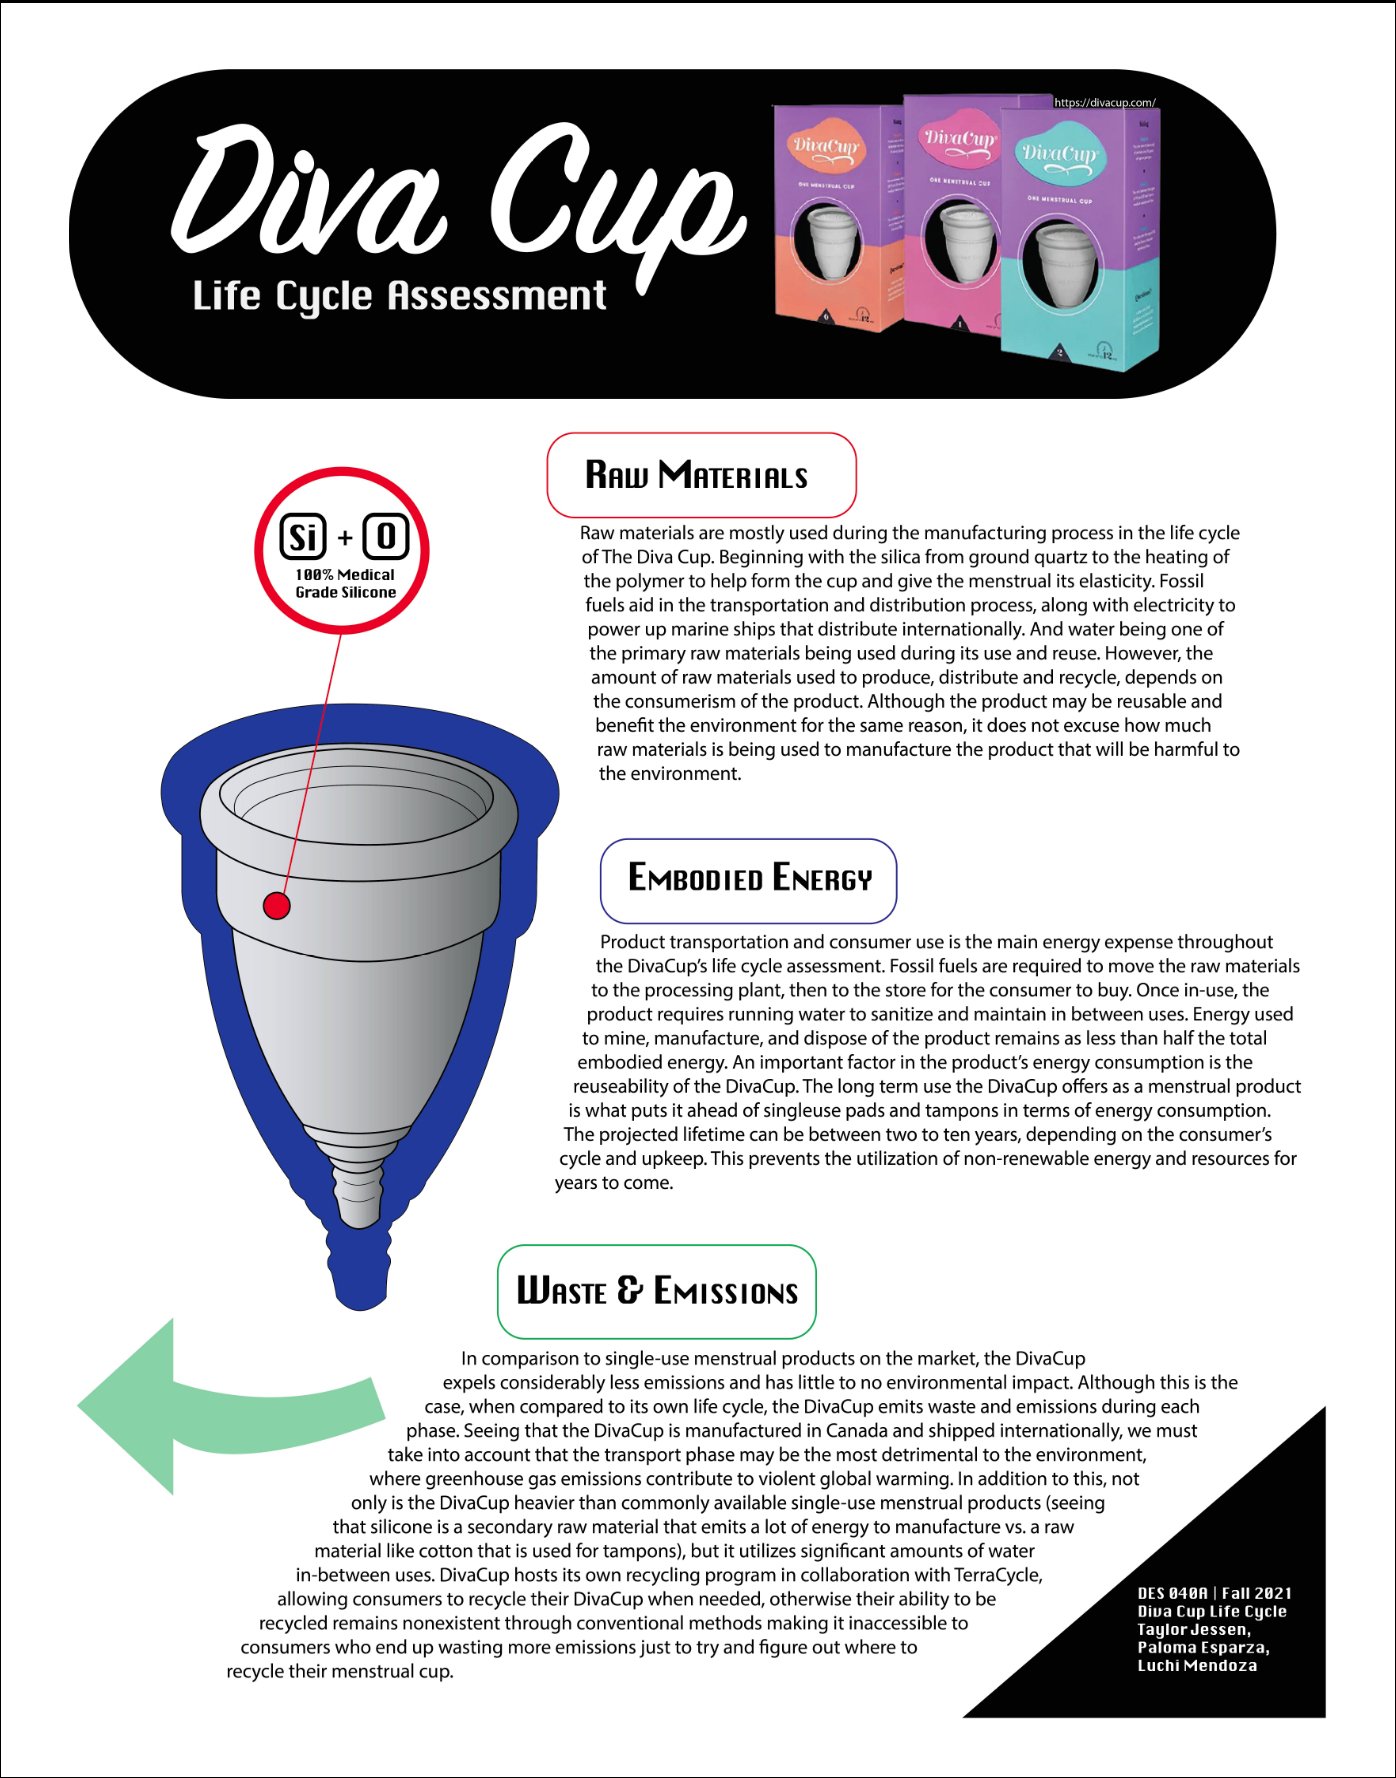 Five Patented Types of Moulded Cup